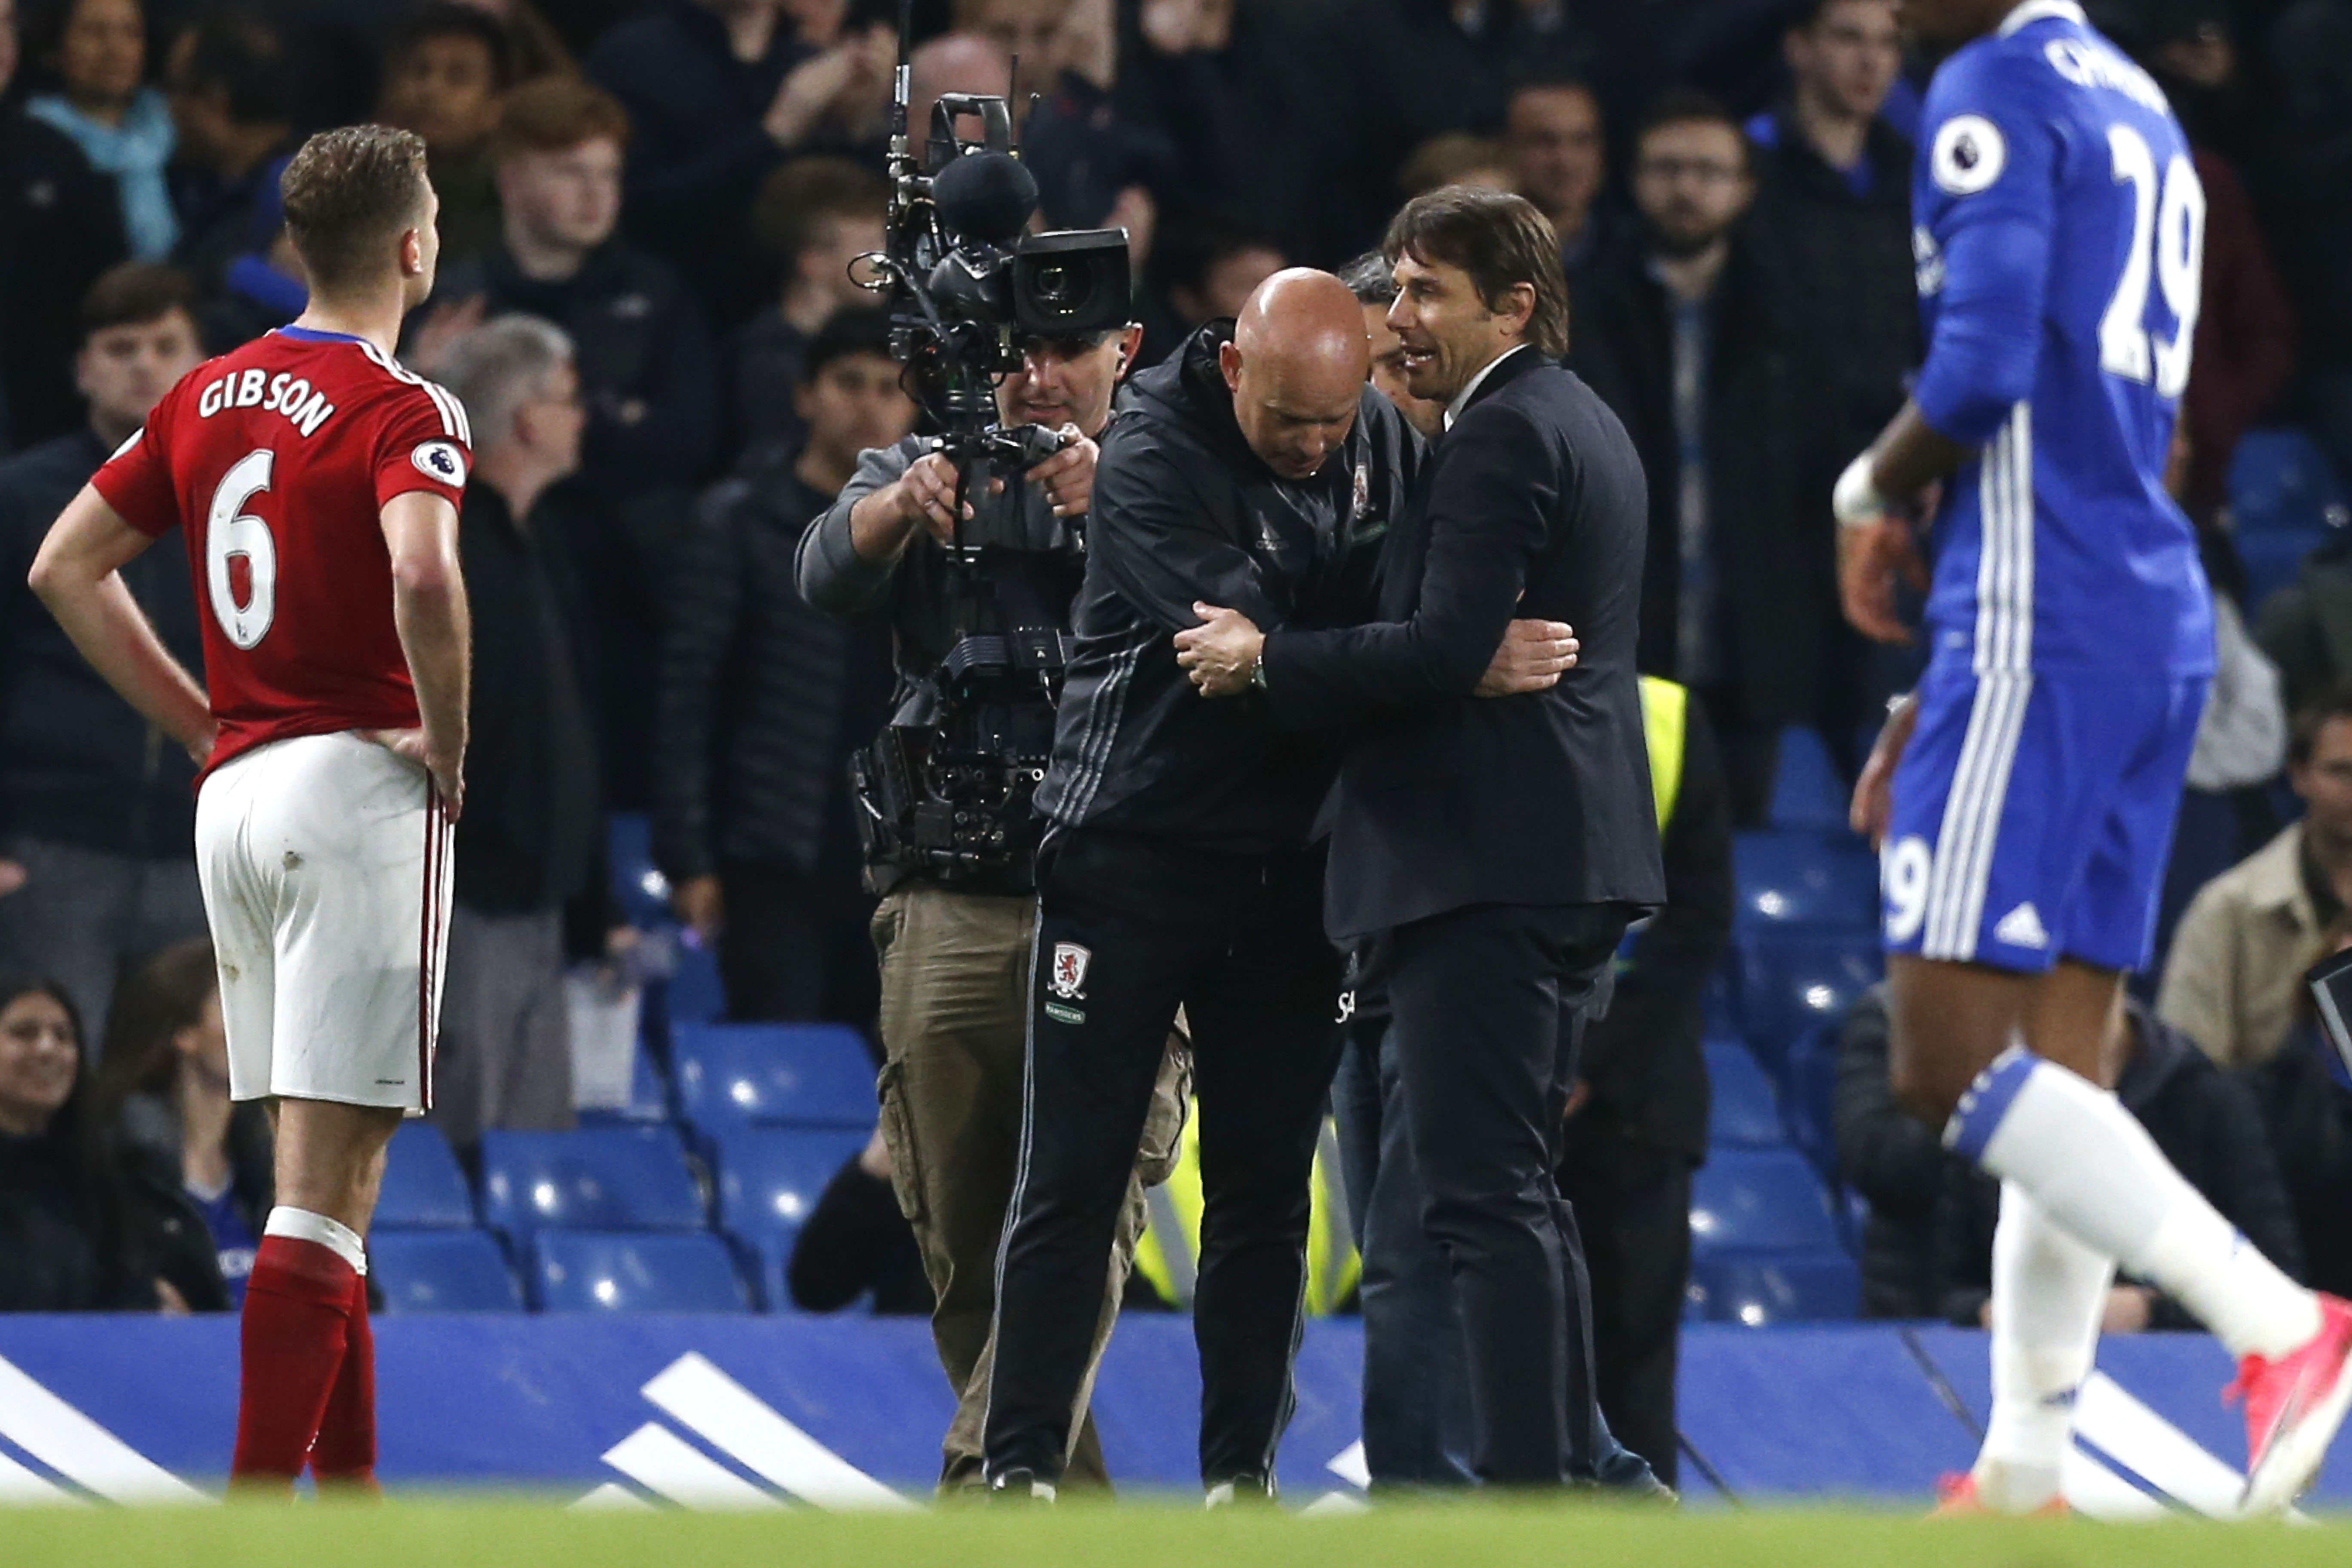 Chelsea's Italian head coach Antonio Conte (R) speaks with Middlesbrough's English head coach Steve Agnew after the end of the English Premier League football match between Chelsea and Middlesbrough at Stamford Bridge in London on May 8, 2017. / AFP PHOTO / Ian KINGTON / RESTRICTED TO EDITORIAL USE. No use with unauthorized audio, video, data, fixture lists, club/league logos or 'live' services. Online in-match use limited to 75 images, no video emulation. No use in betting, games or single club/league/player publications.  /         (Photo credit should read IAN KINGTON/AFP/Getty Images)